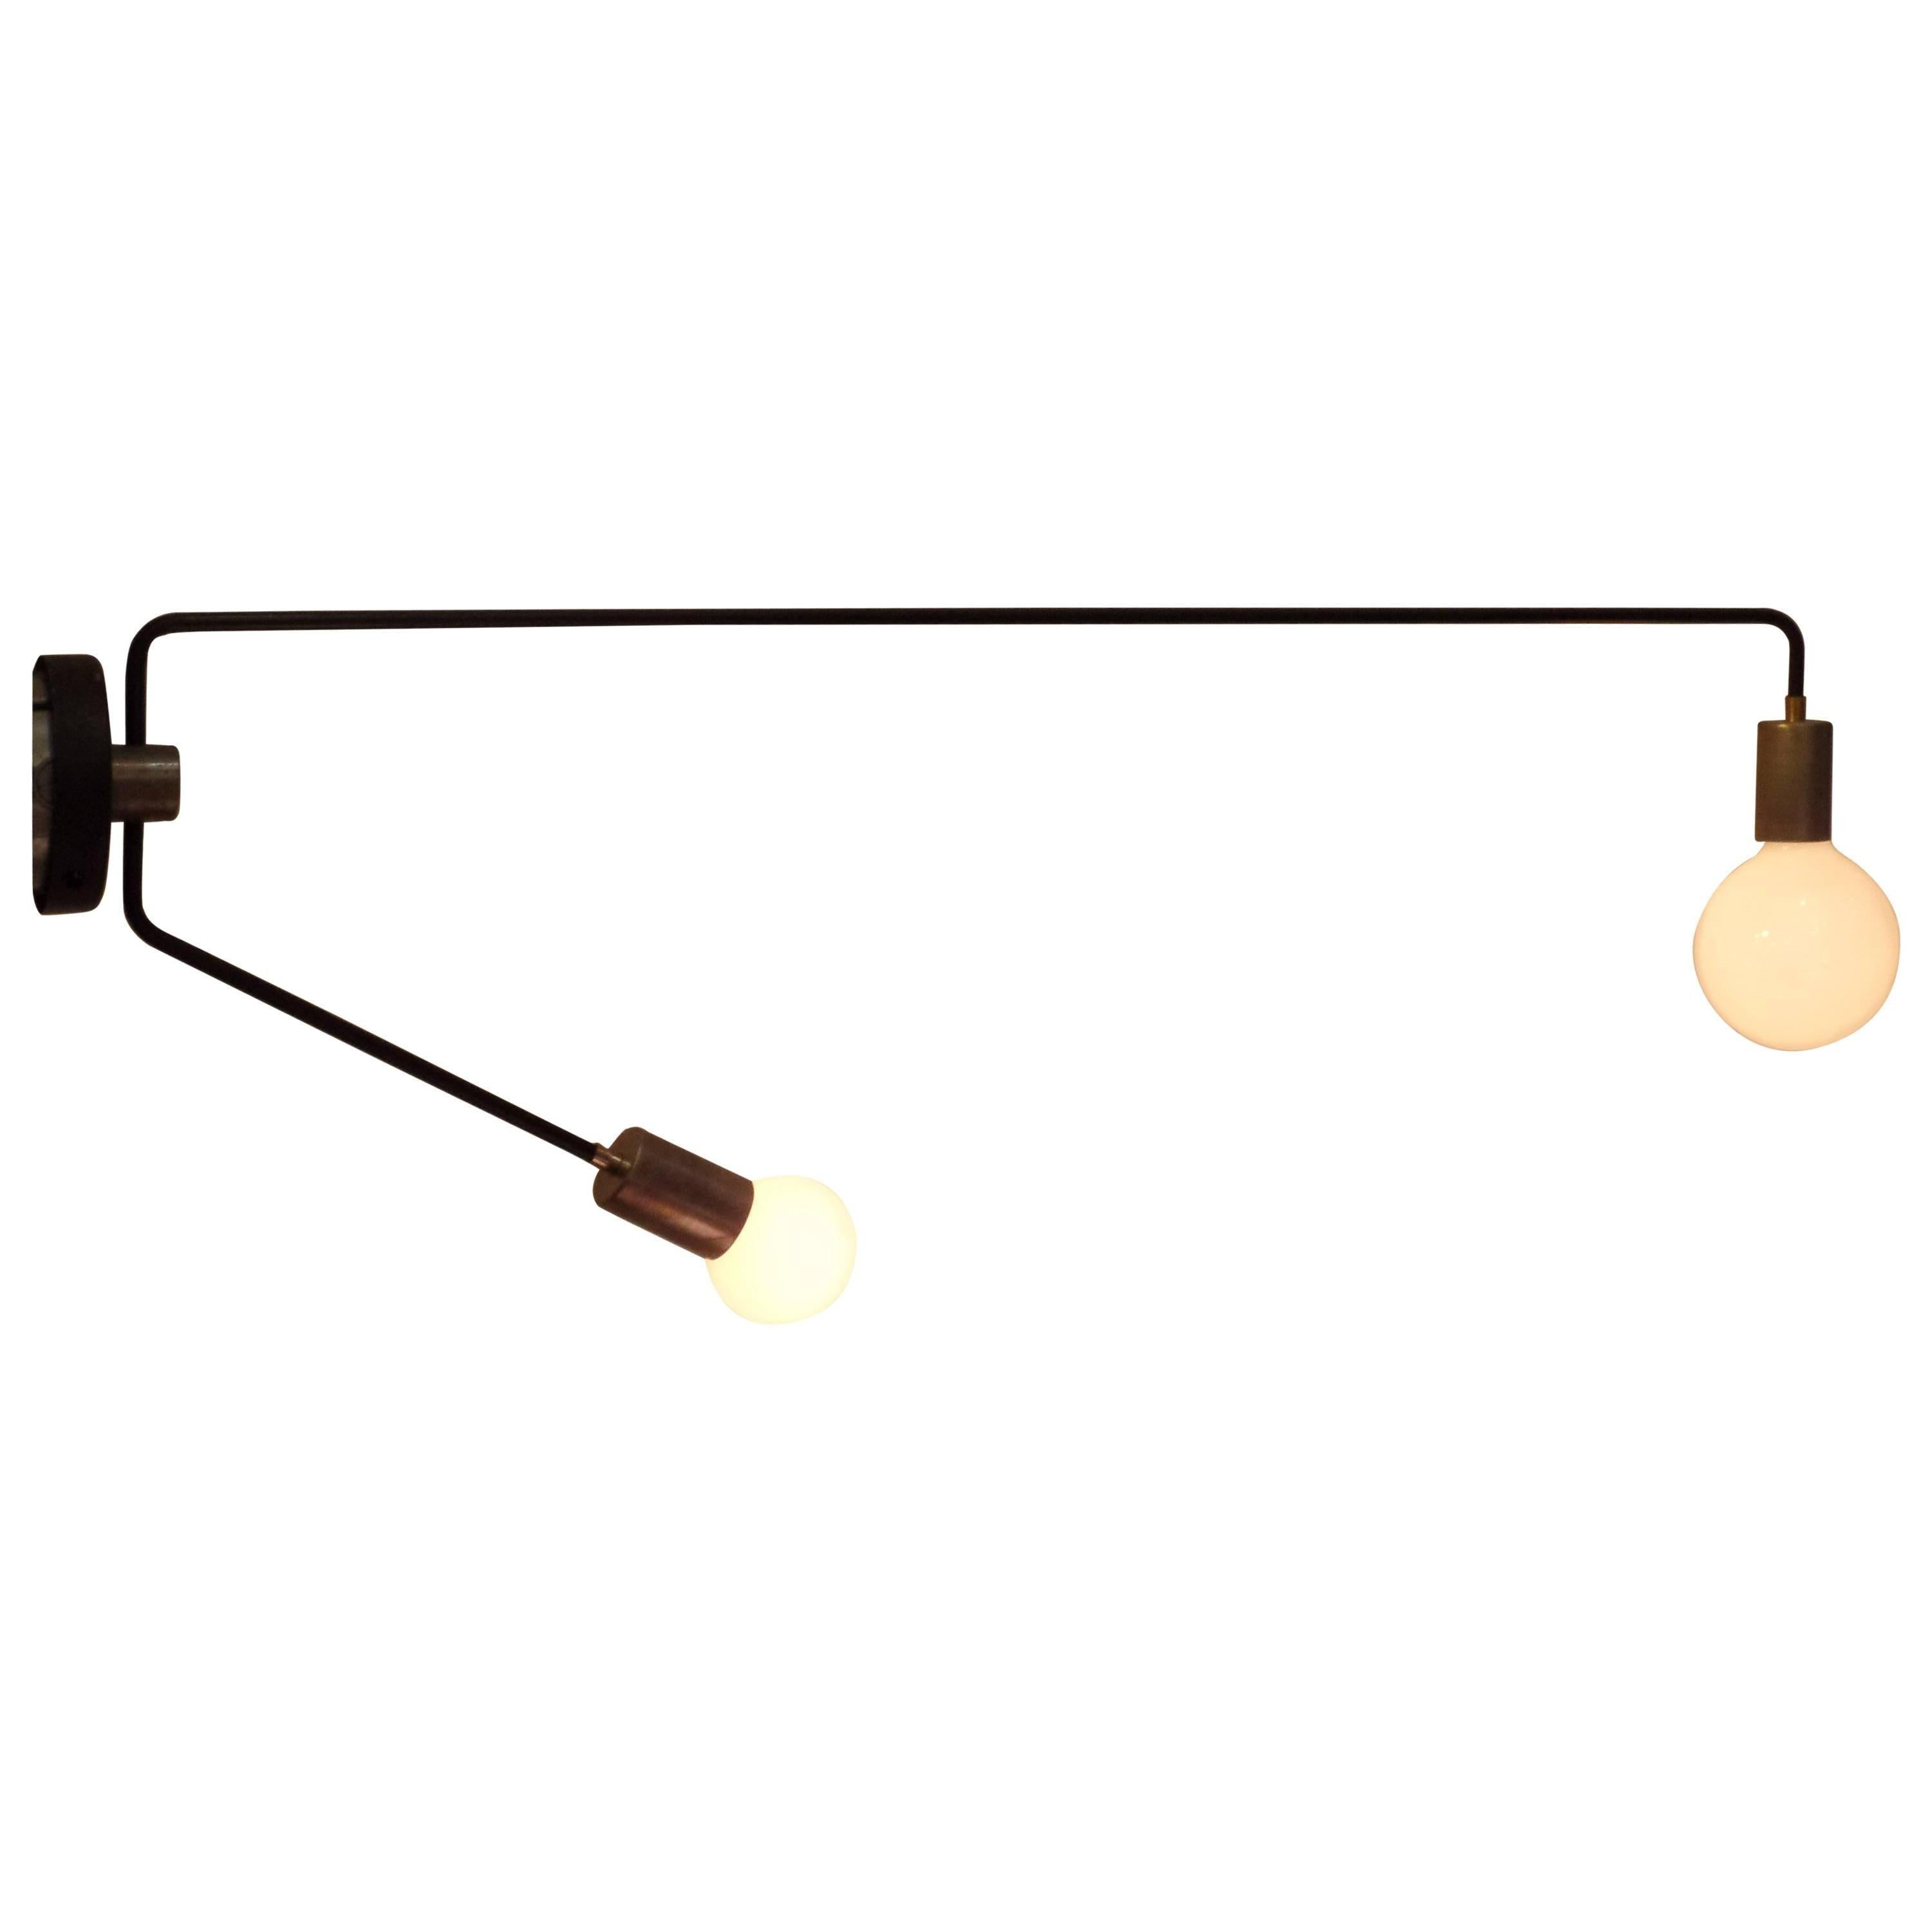 Four Modern Articulating Wall Arm Extension Lights / Sconces